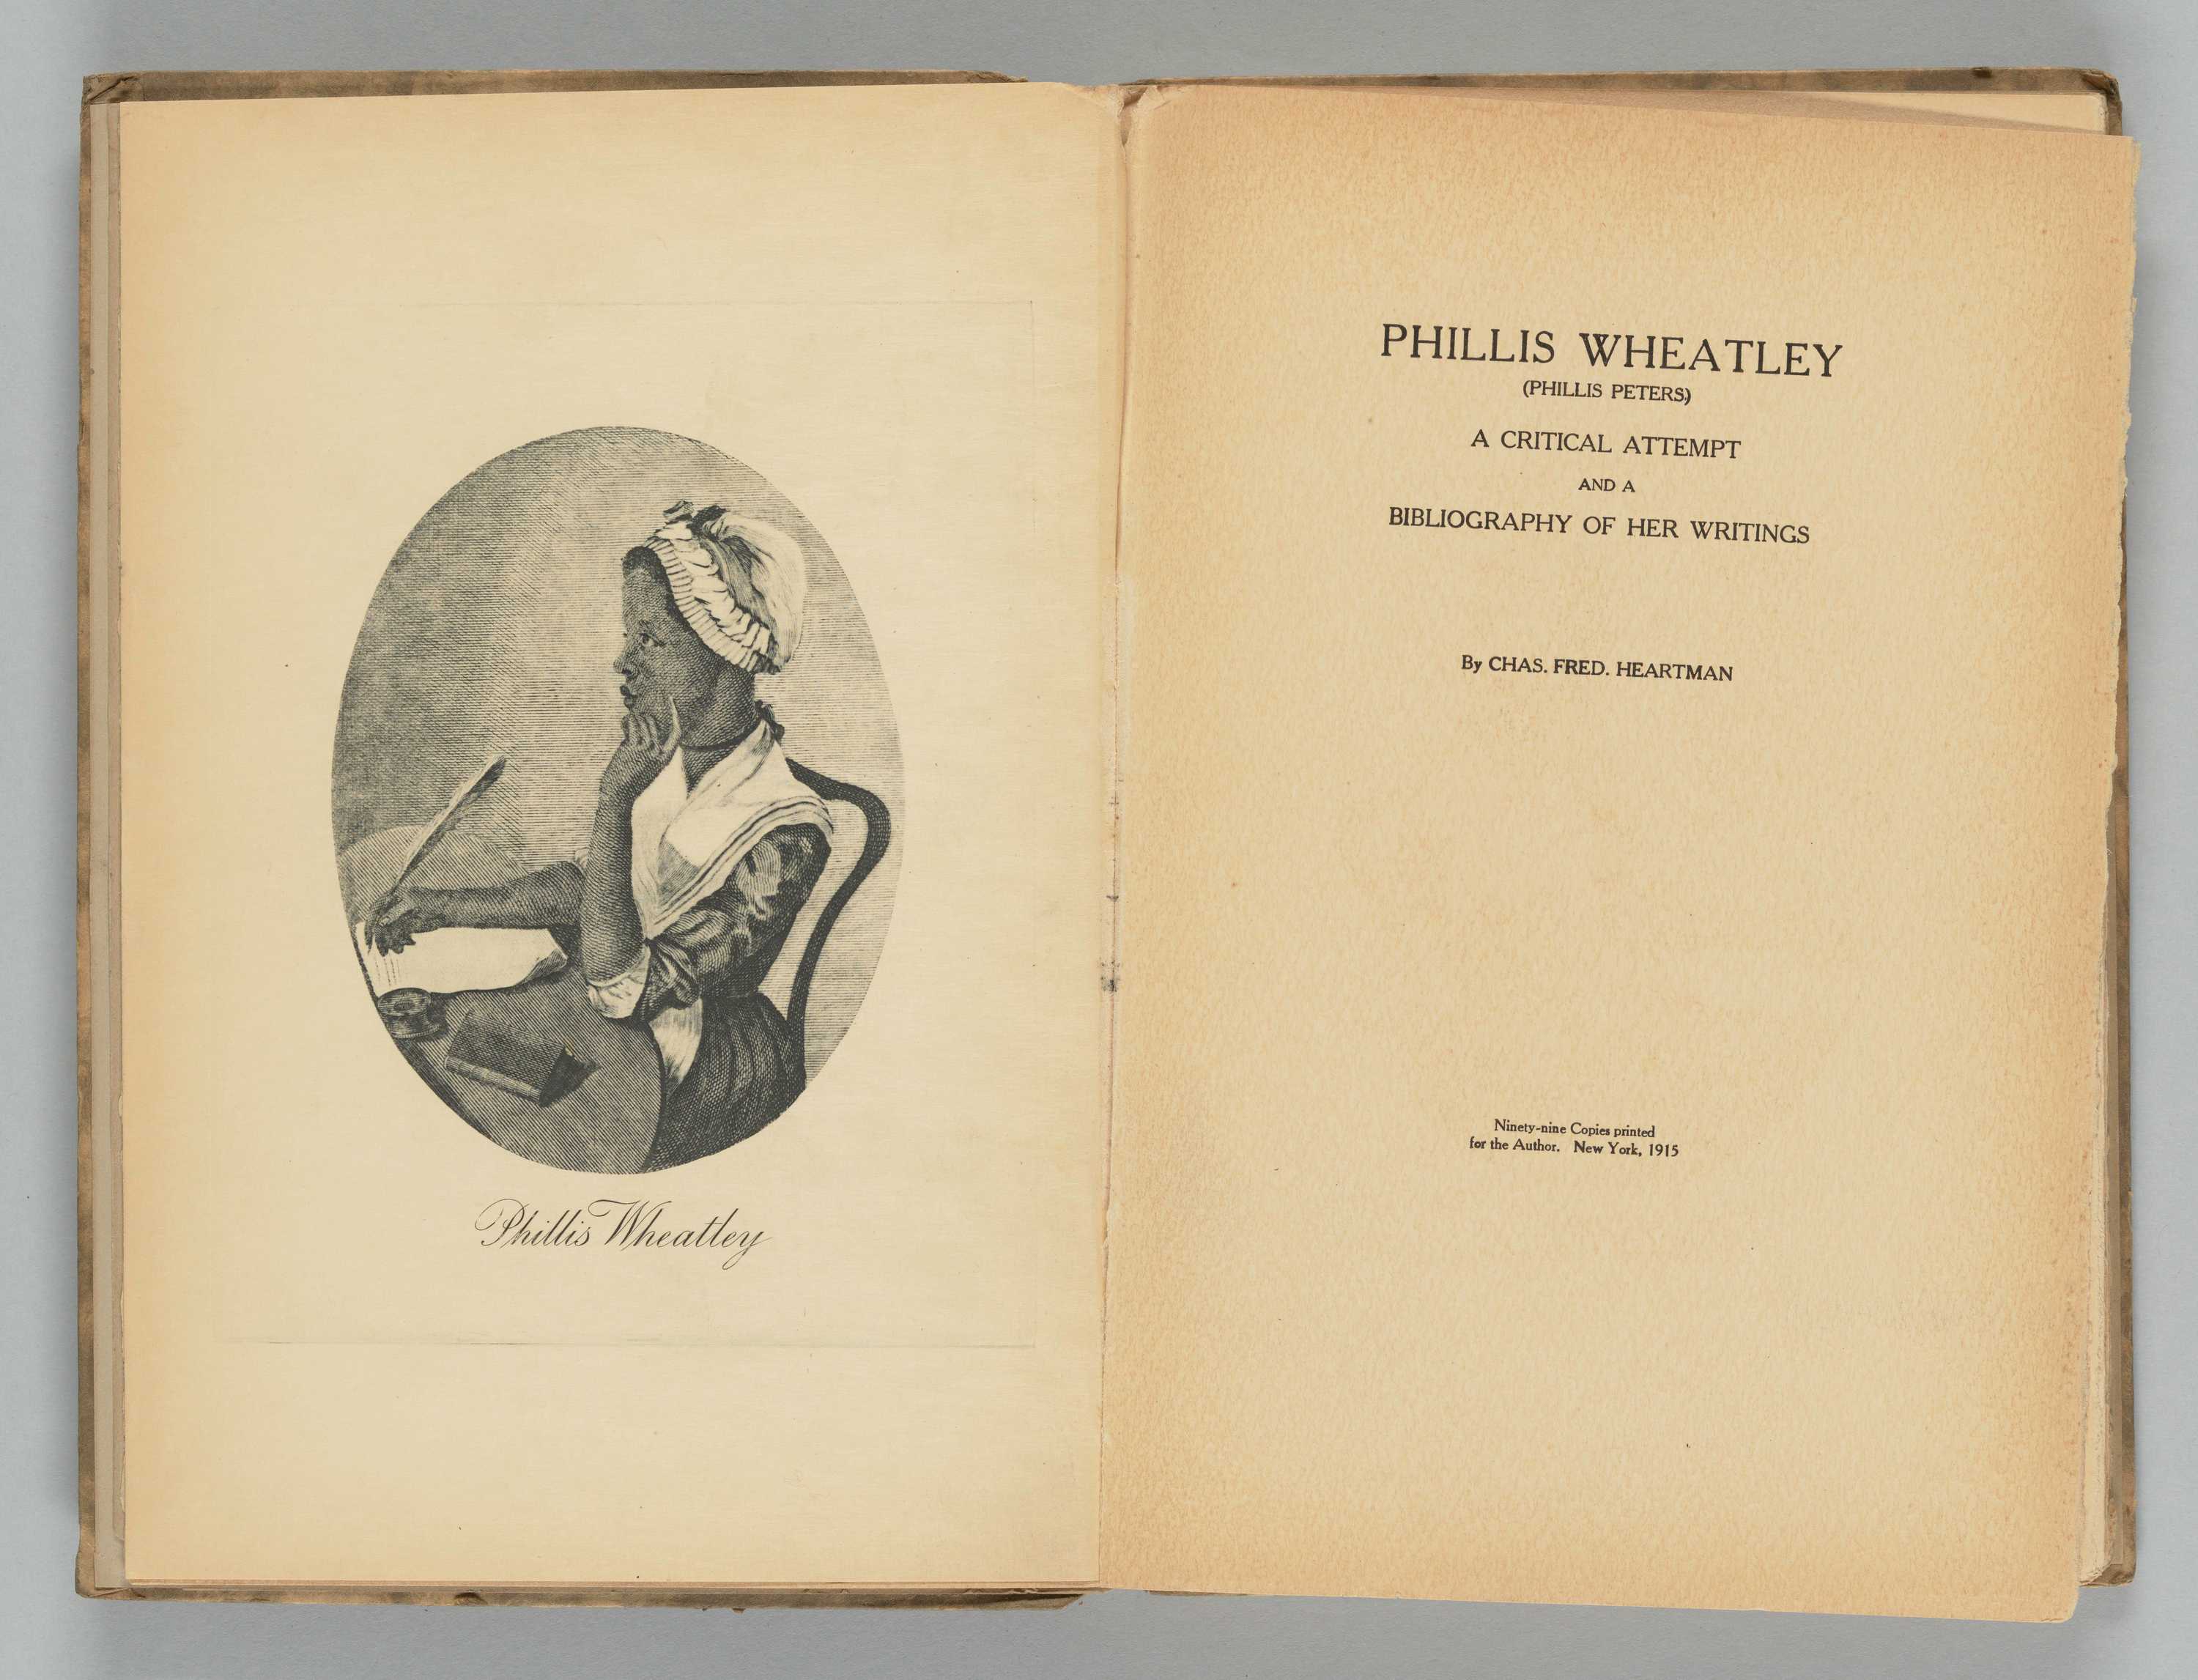 Inside cover of a book featuring illustration of Phillis Wheatley